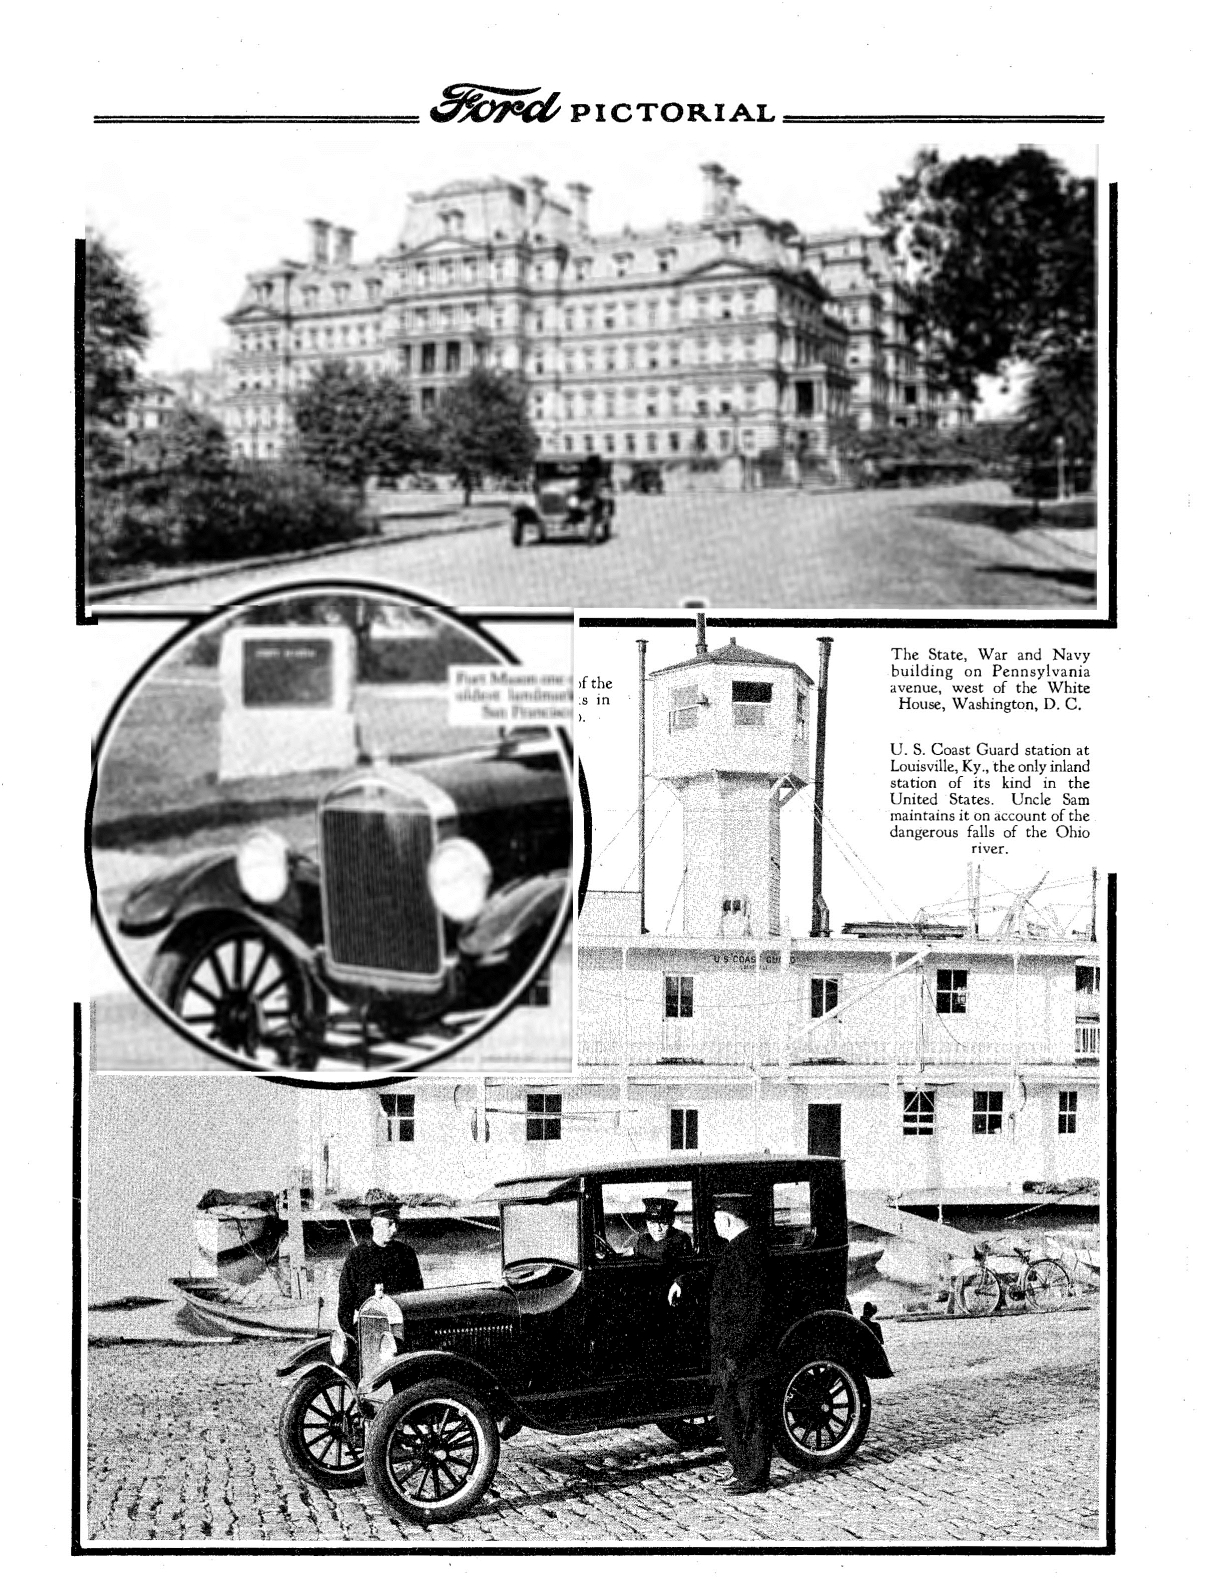 1926_Ford_Pictorial-01-3